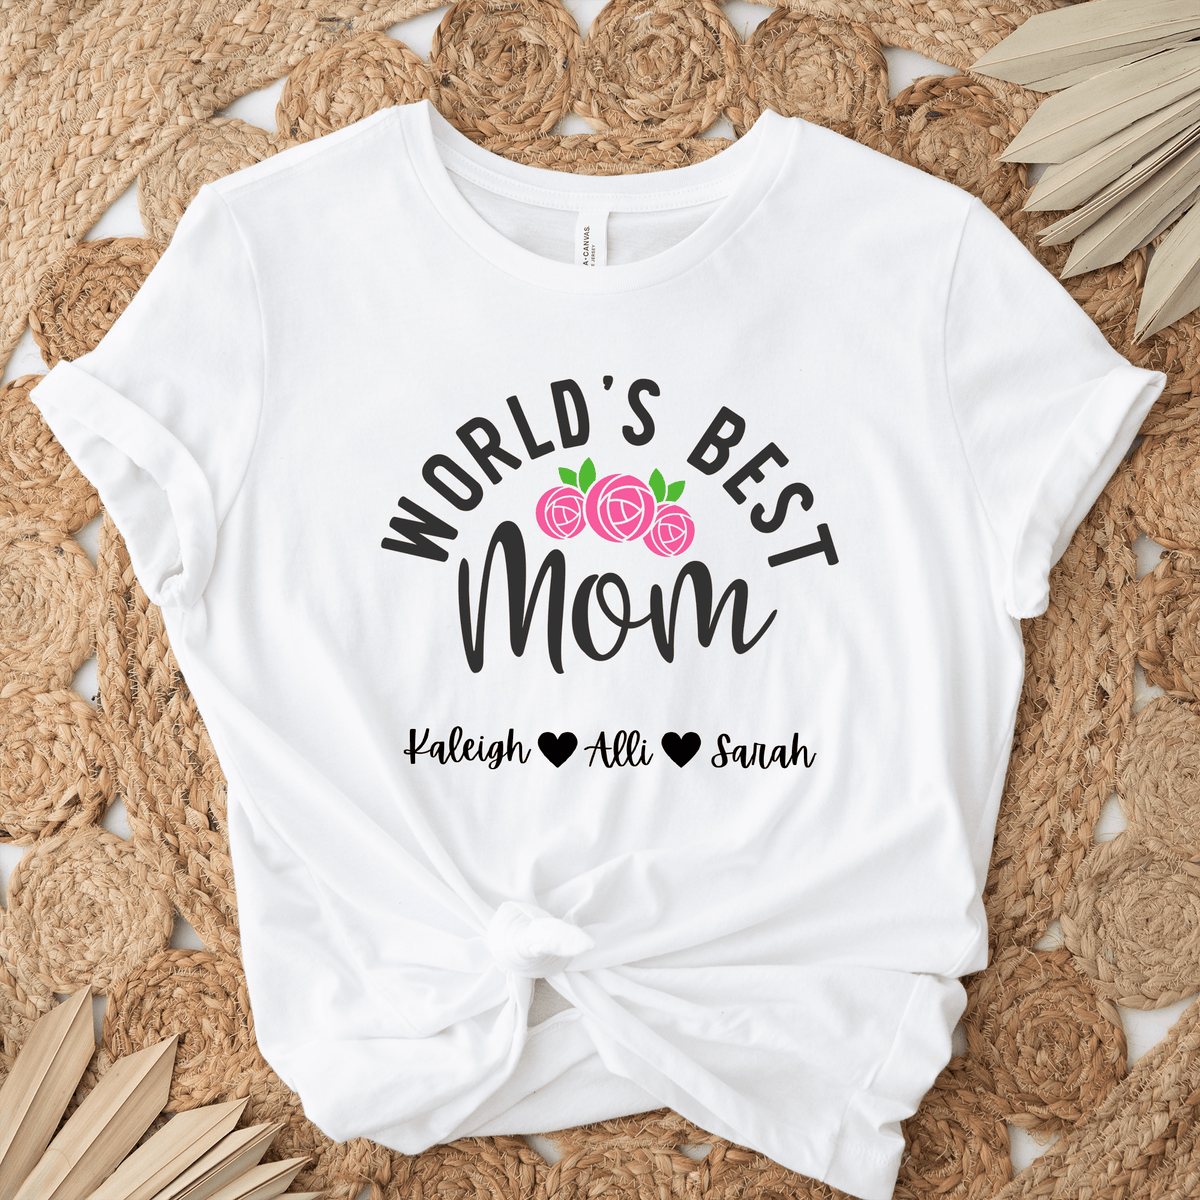 Womens White T Shirt with Worlds-Best-Mom design